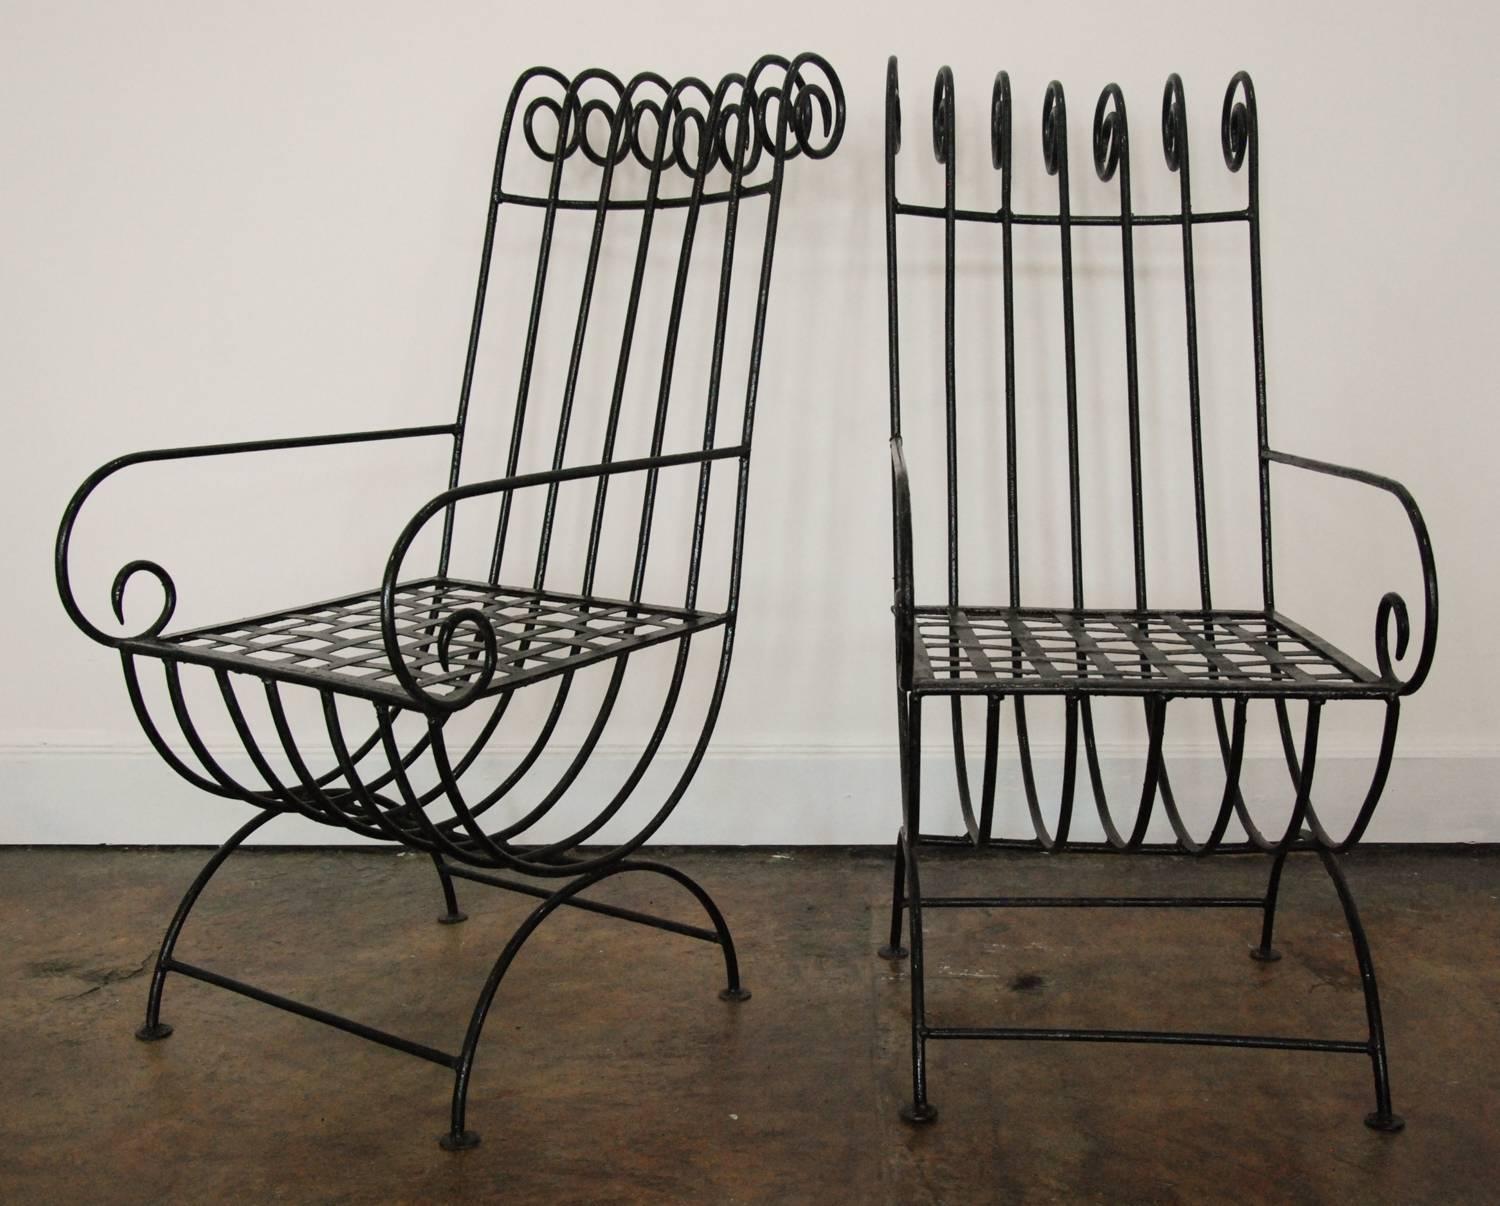 A dramatic pair of highback, French, 1940s style iron garden chairs in the style of Mathieu Matégot with curved armrest and back scrolls. In as found originl black painted finish.